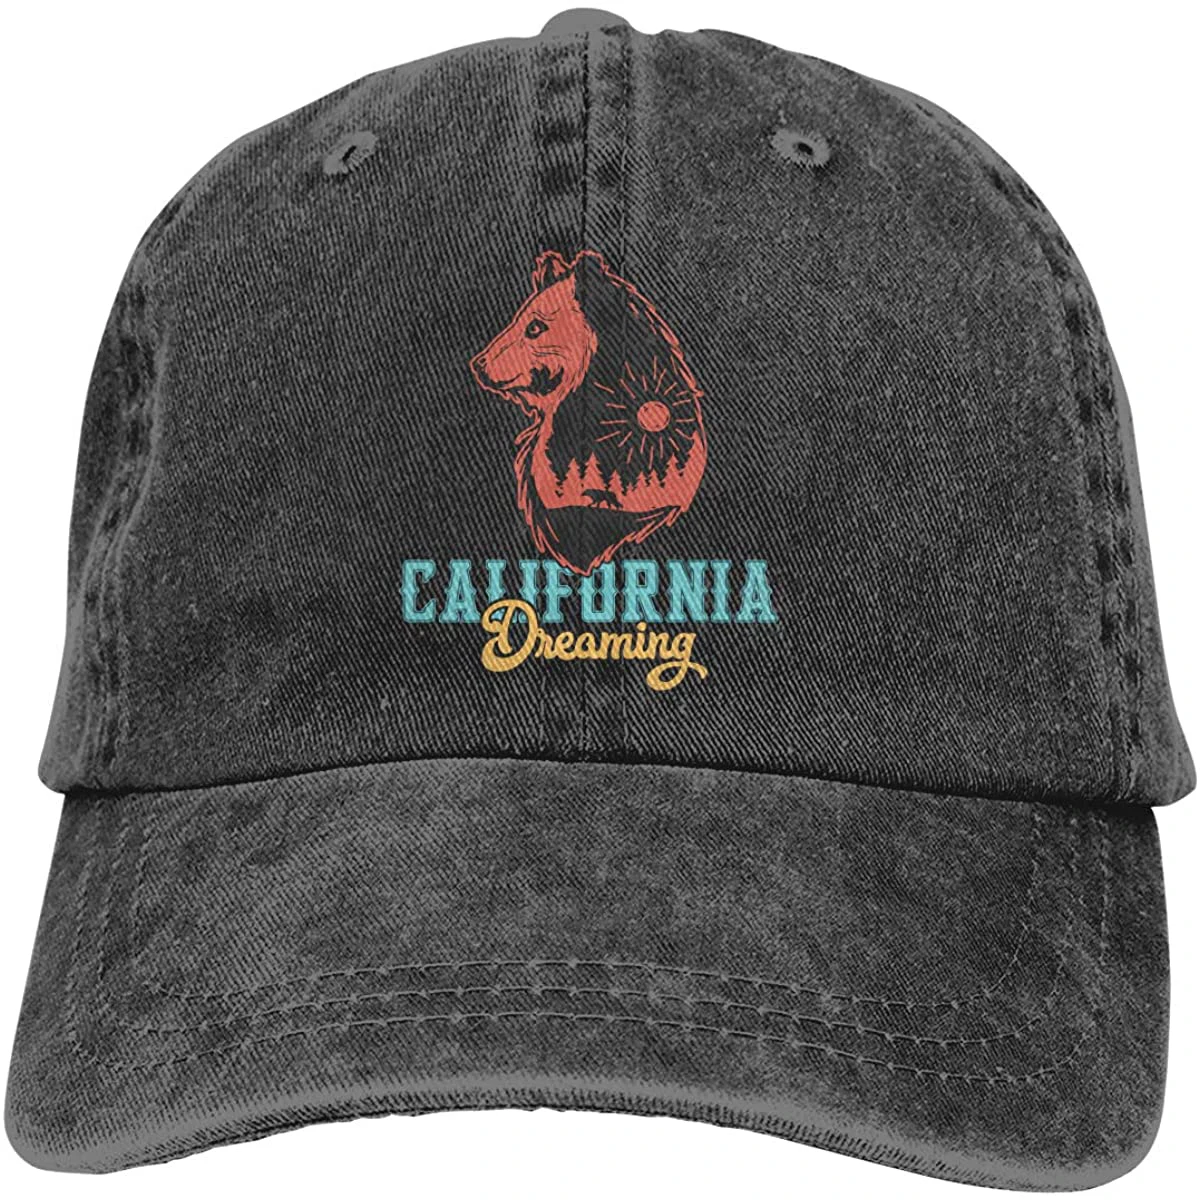 

Unisex California Dreaming Vintage Washed Twill Baseball Caps Adjustable Hats Funny Humor Irony Graphics Of Adult Gift Black